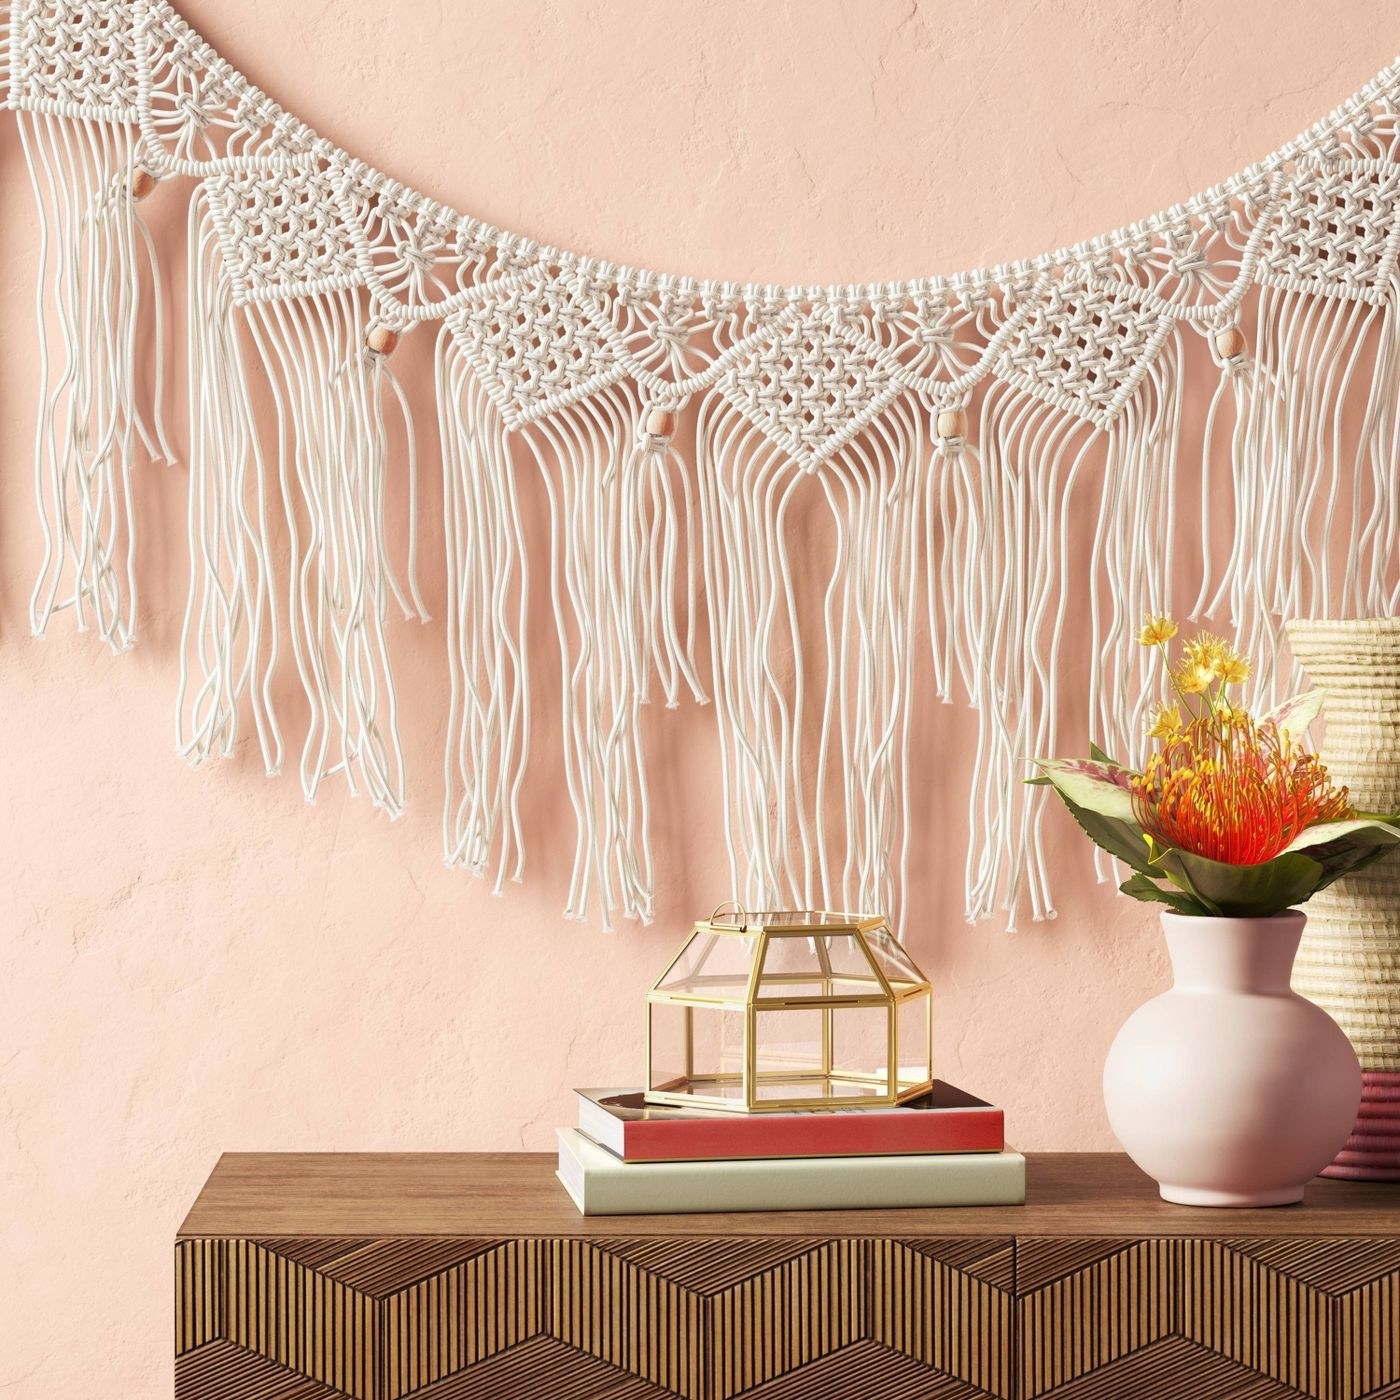 A white cotton garland in a home